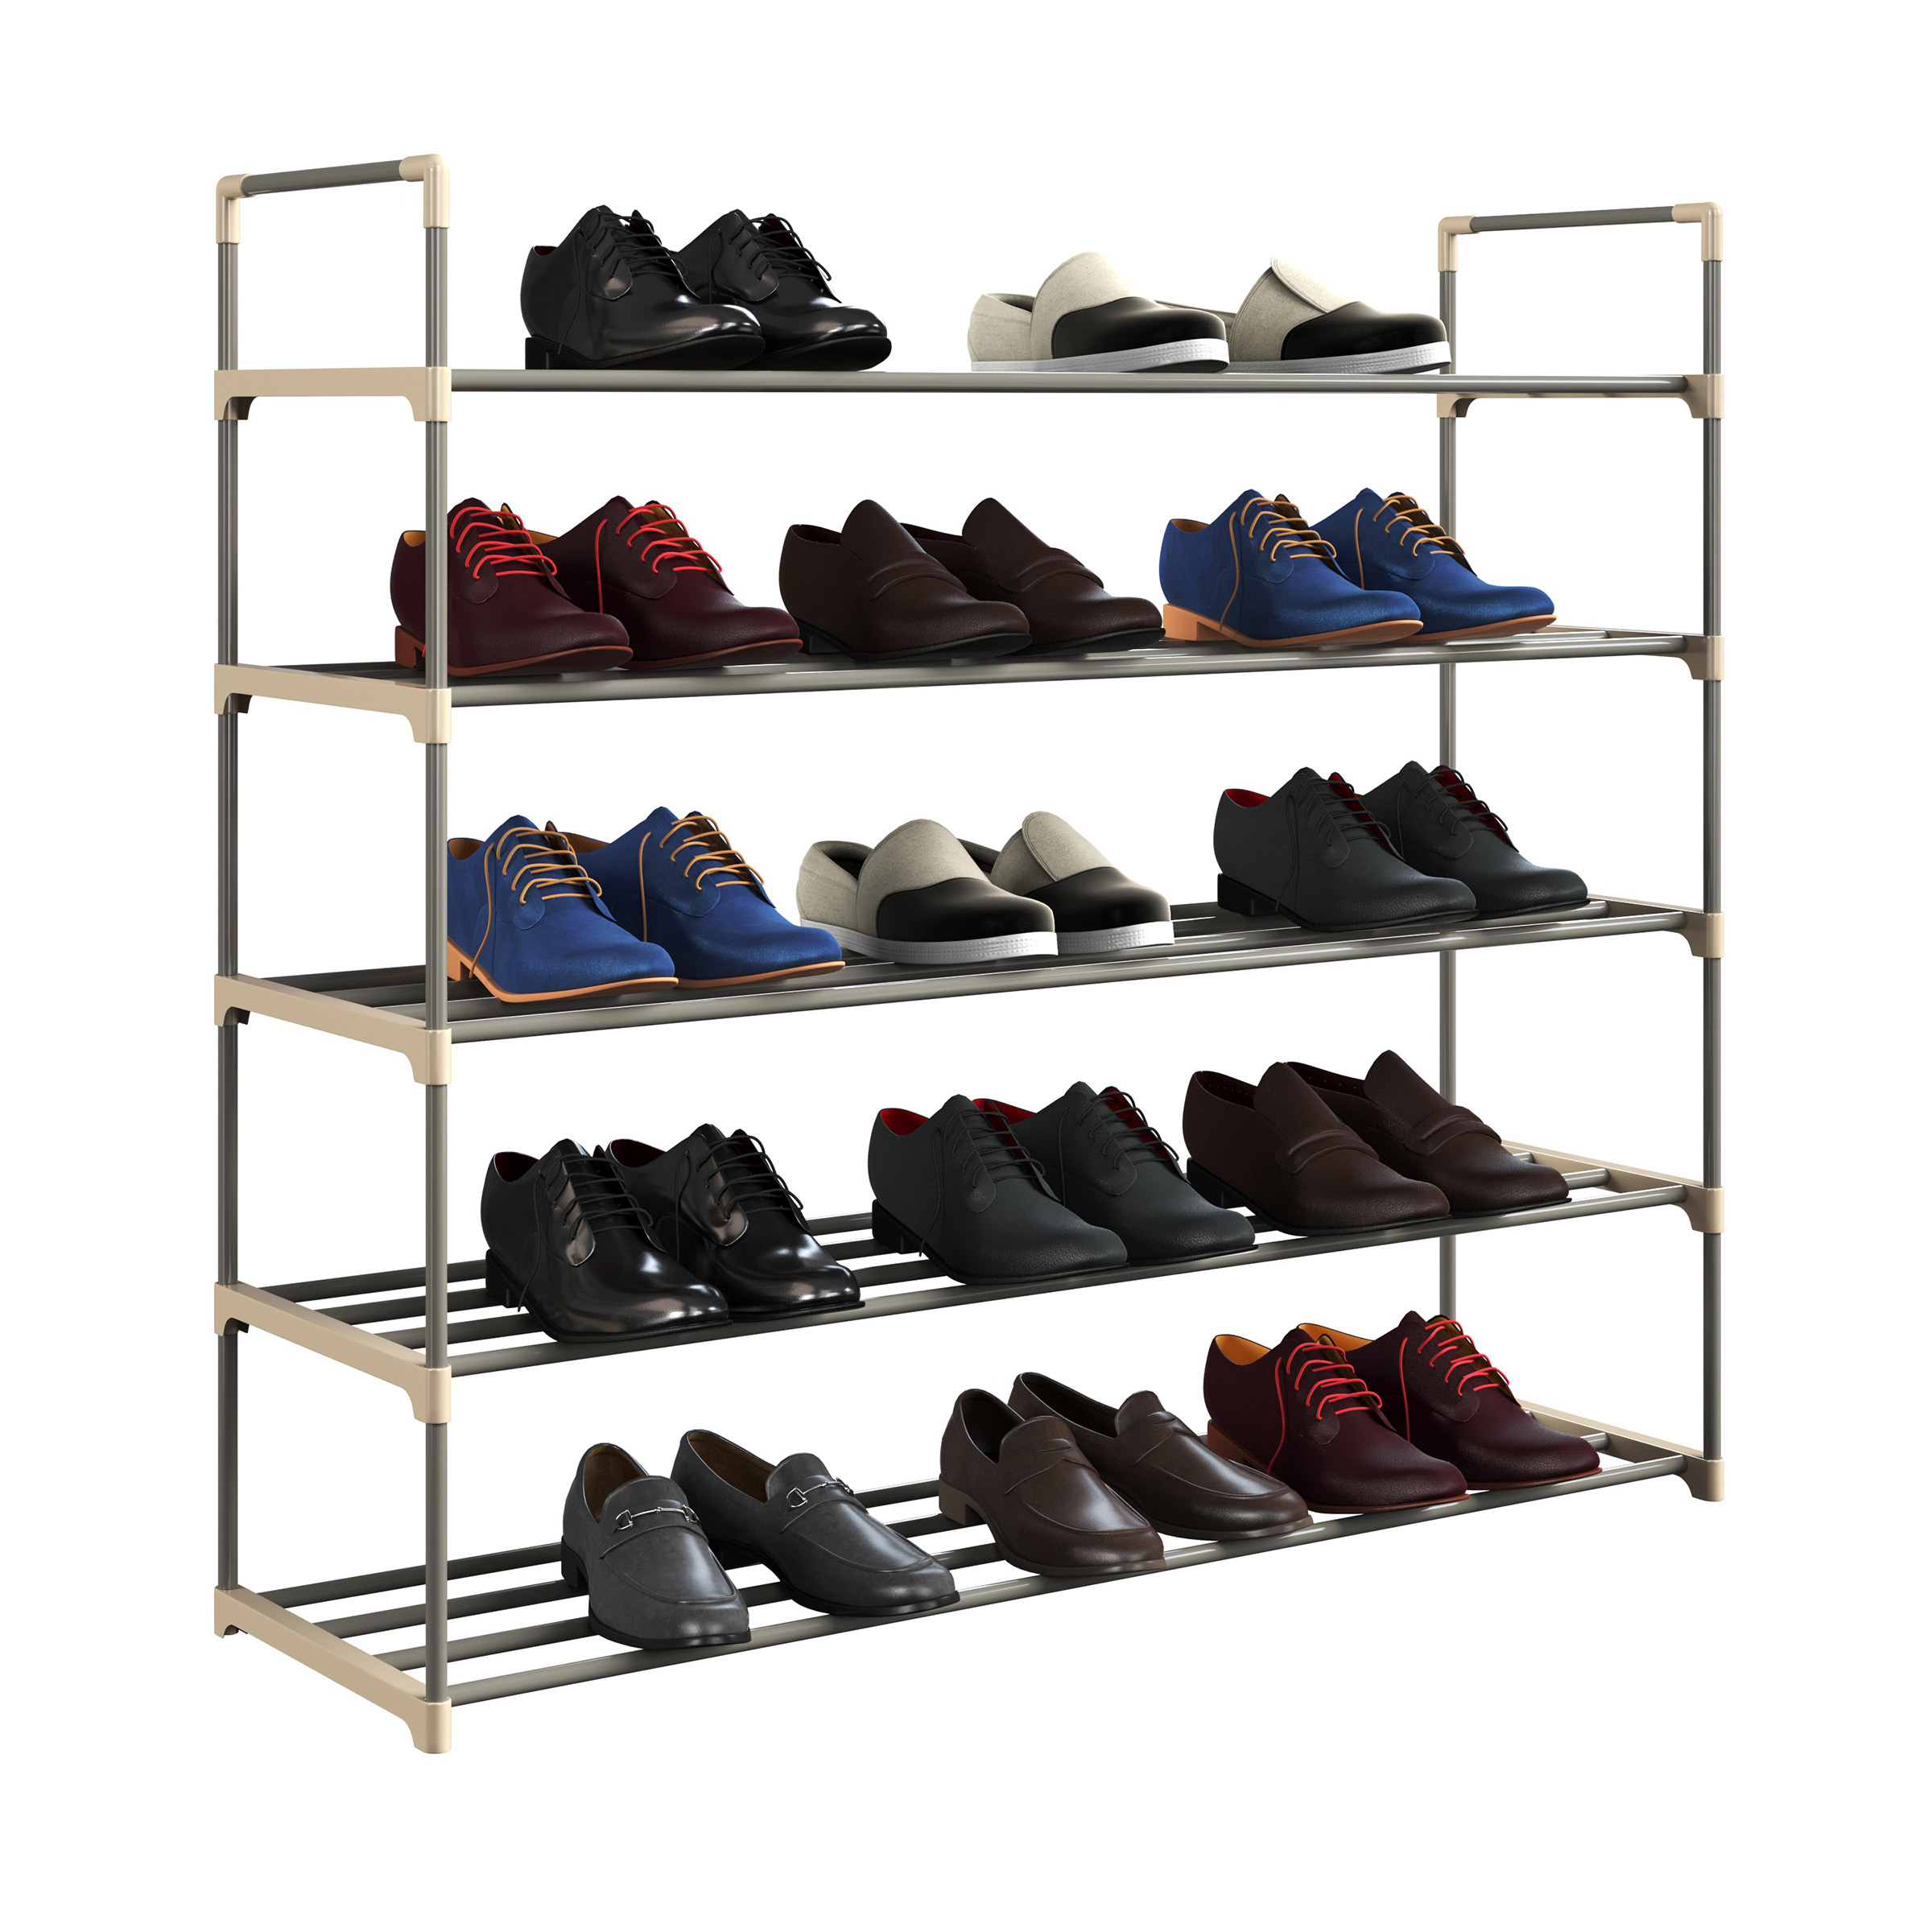 Shoe Rack Storage Five Shelf 5 Shelves Hallway Entryway Holds 30 Pairs 40 Inches L